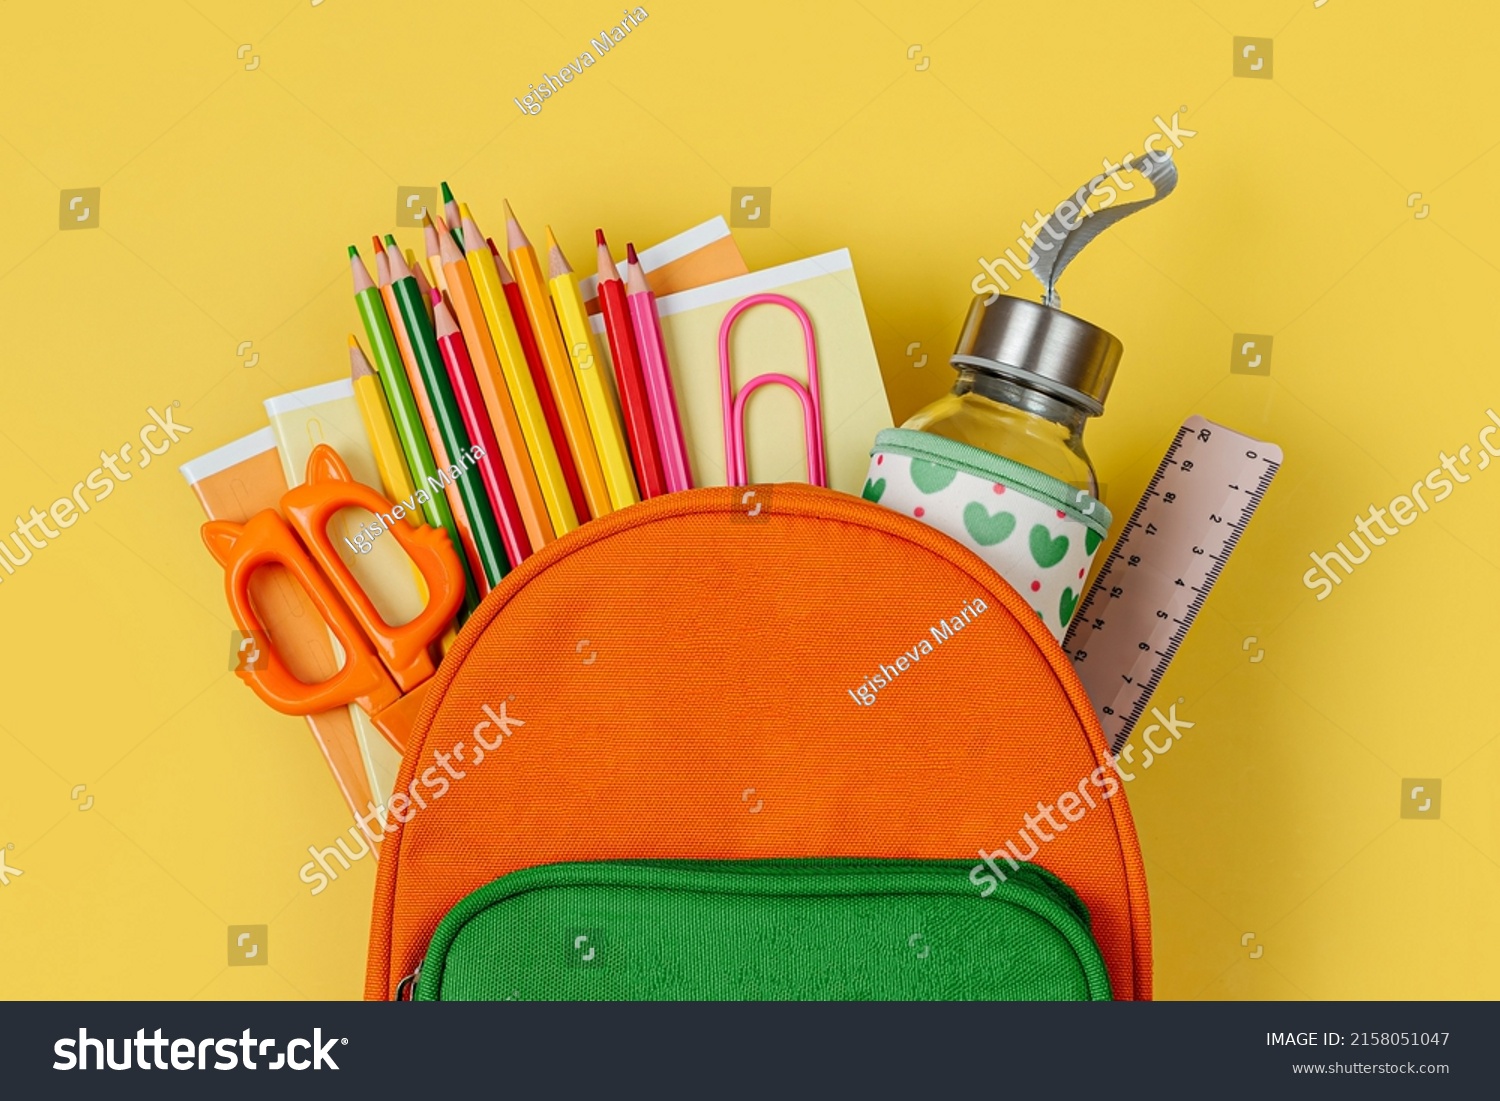 Kids Backpack with school bus on yellow background. Opened School backpack with stationery. Primary School or kindergarten.  #2158051047